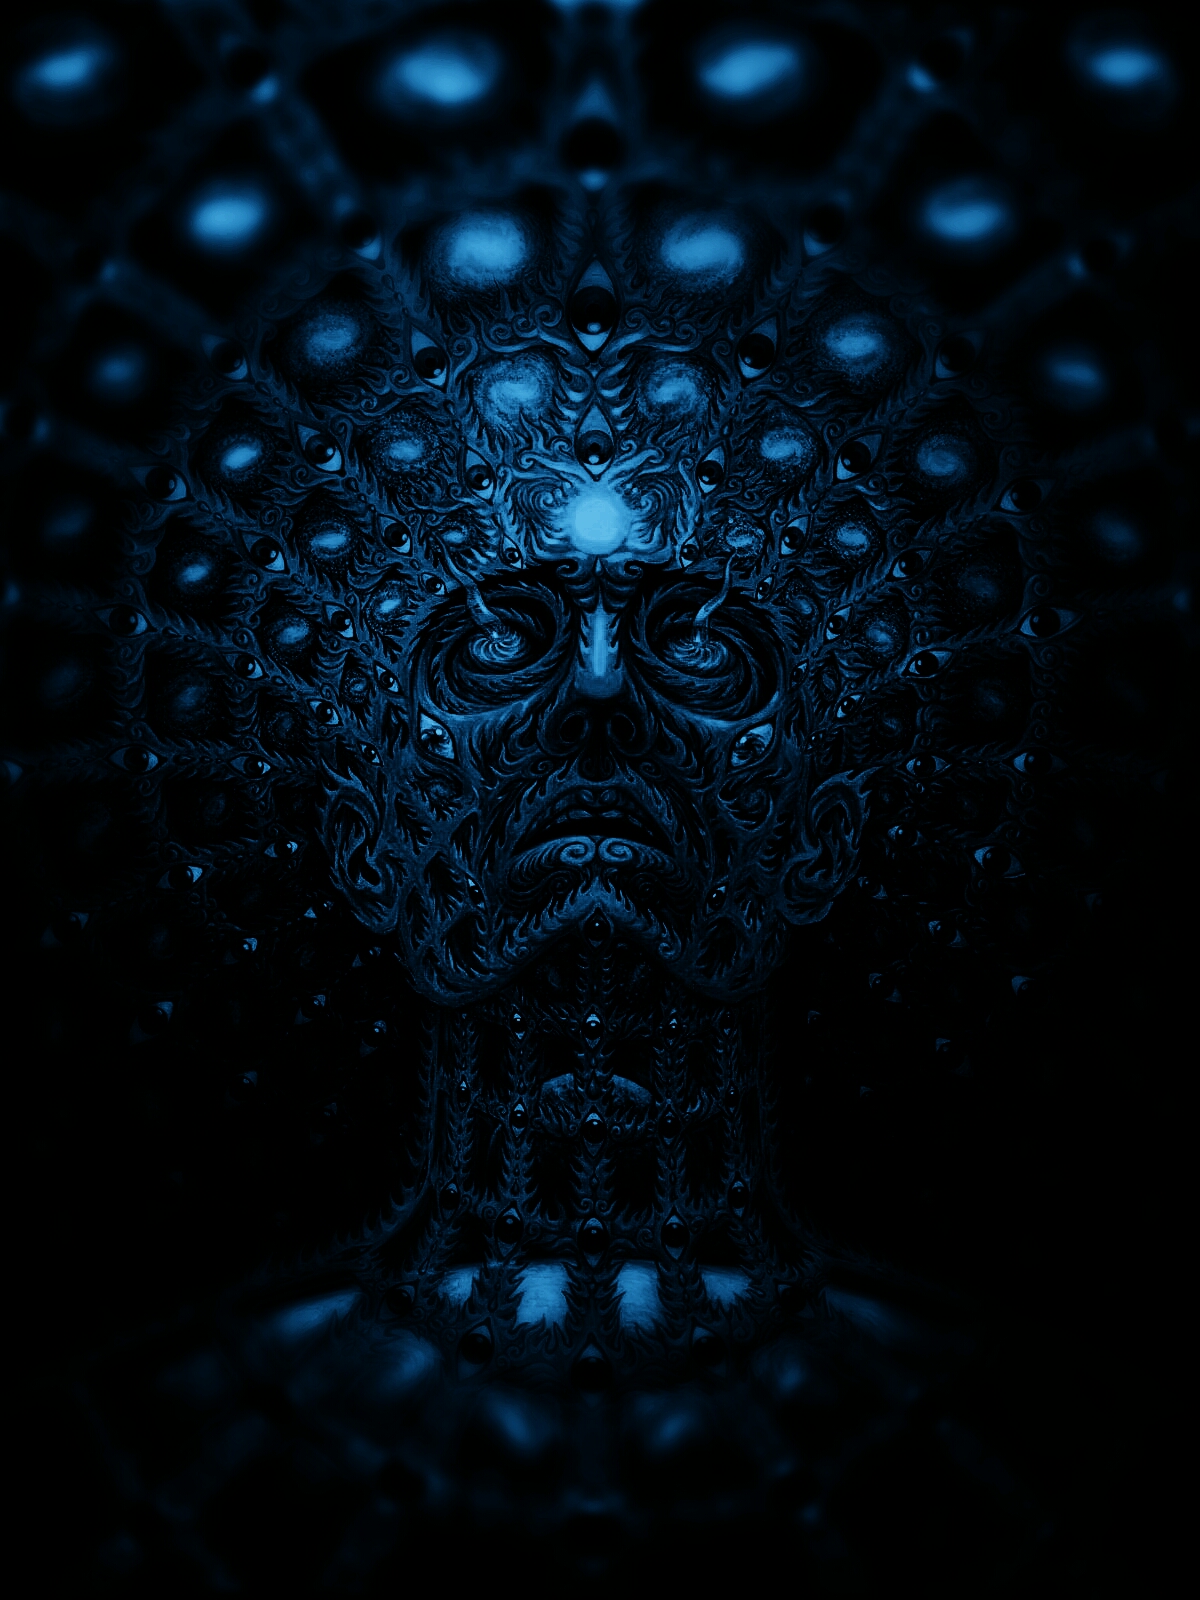 Tool Band Background Wallpaper For Smartphone Art